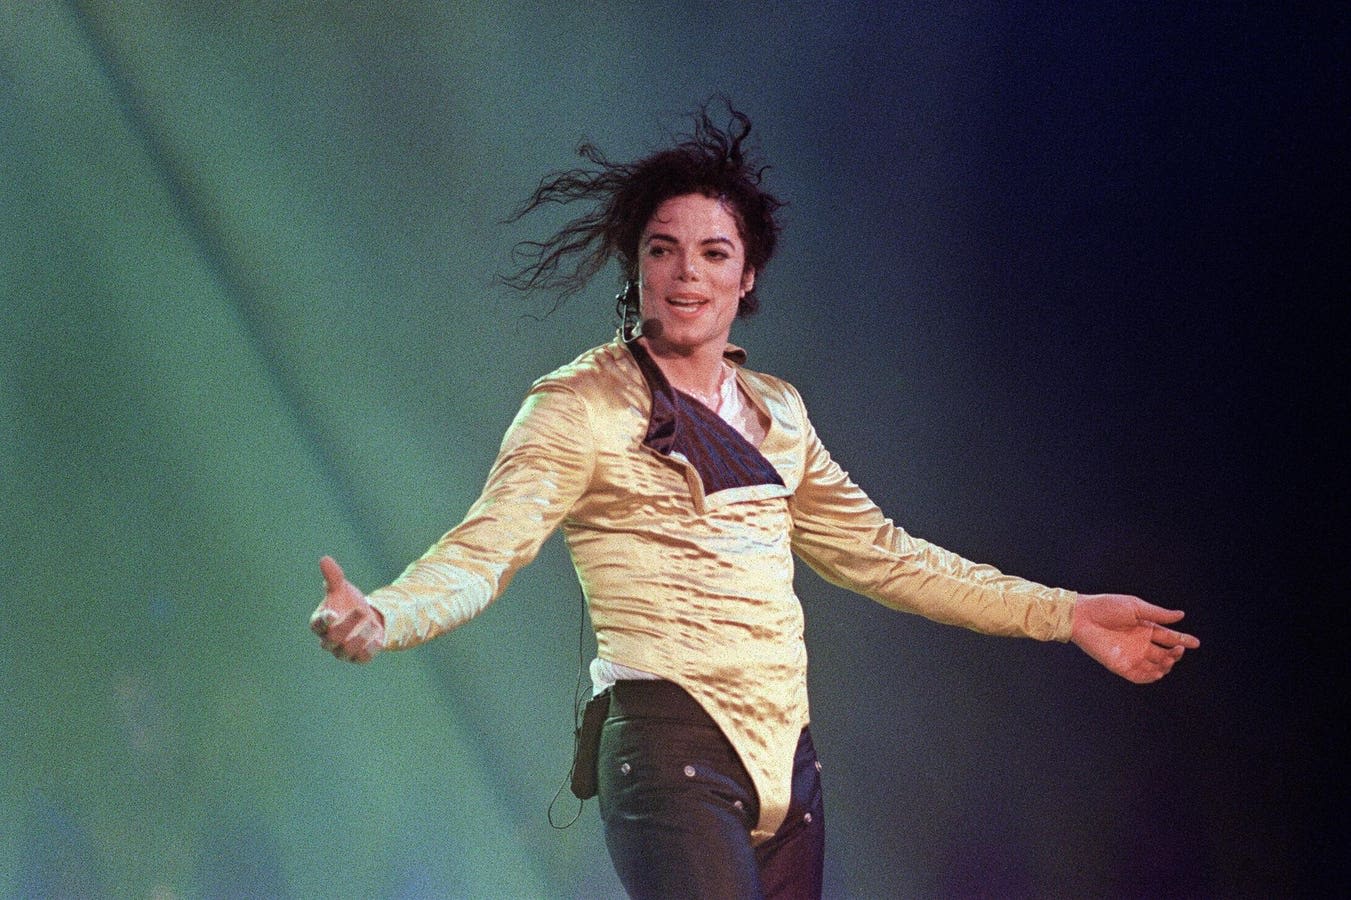 Michael Jackson Charts Not One, But Two Top 10 Albums In America